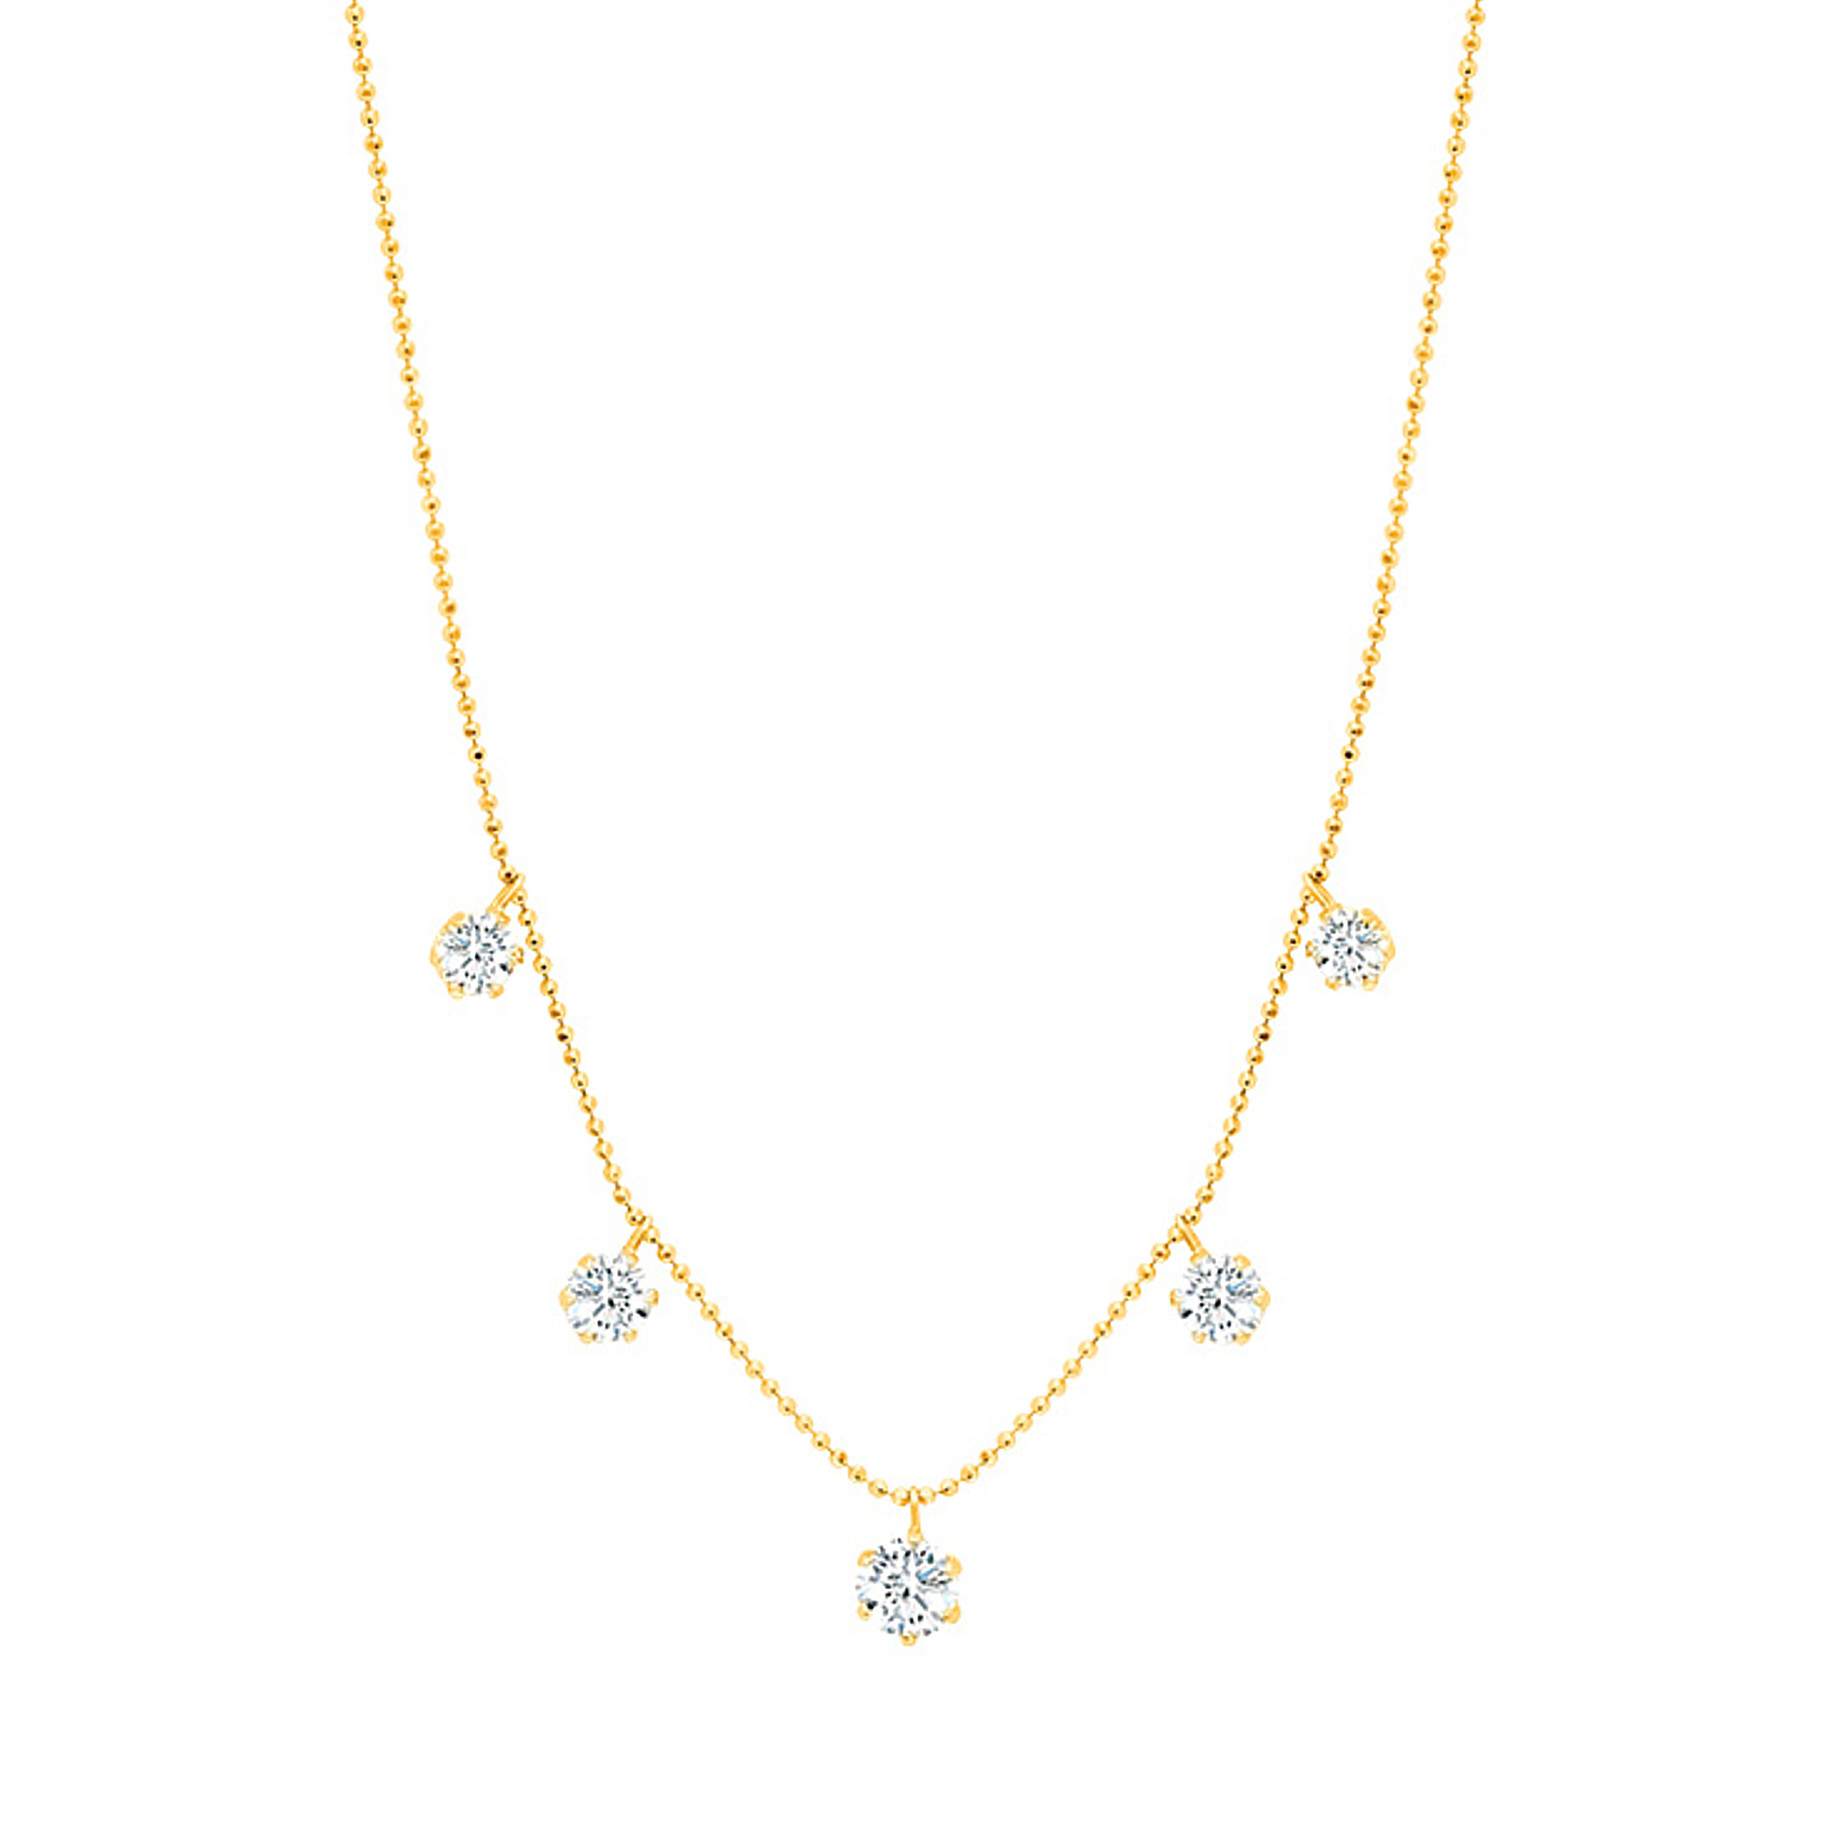 Graziela Gems - Necklace - Large Floating Diamond Necklace - Yellow Gold